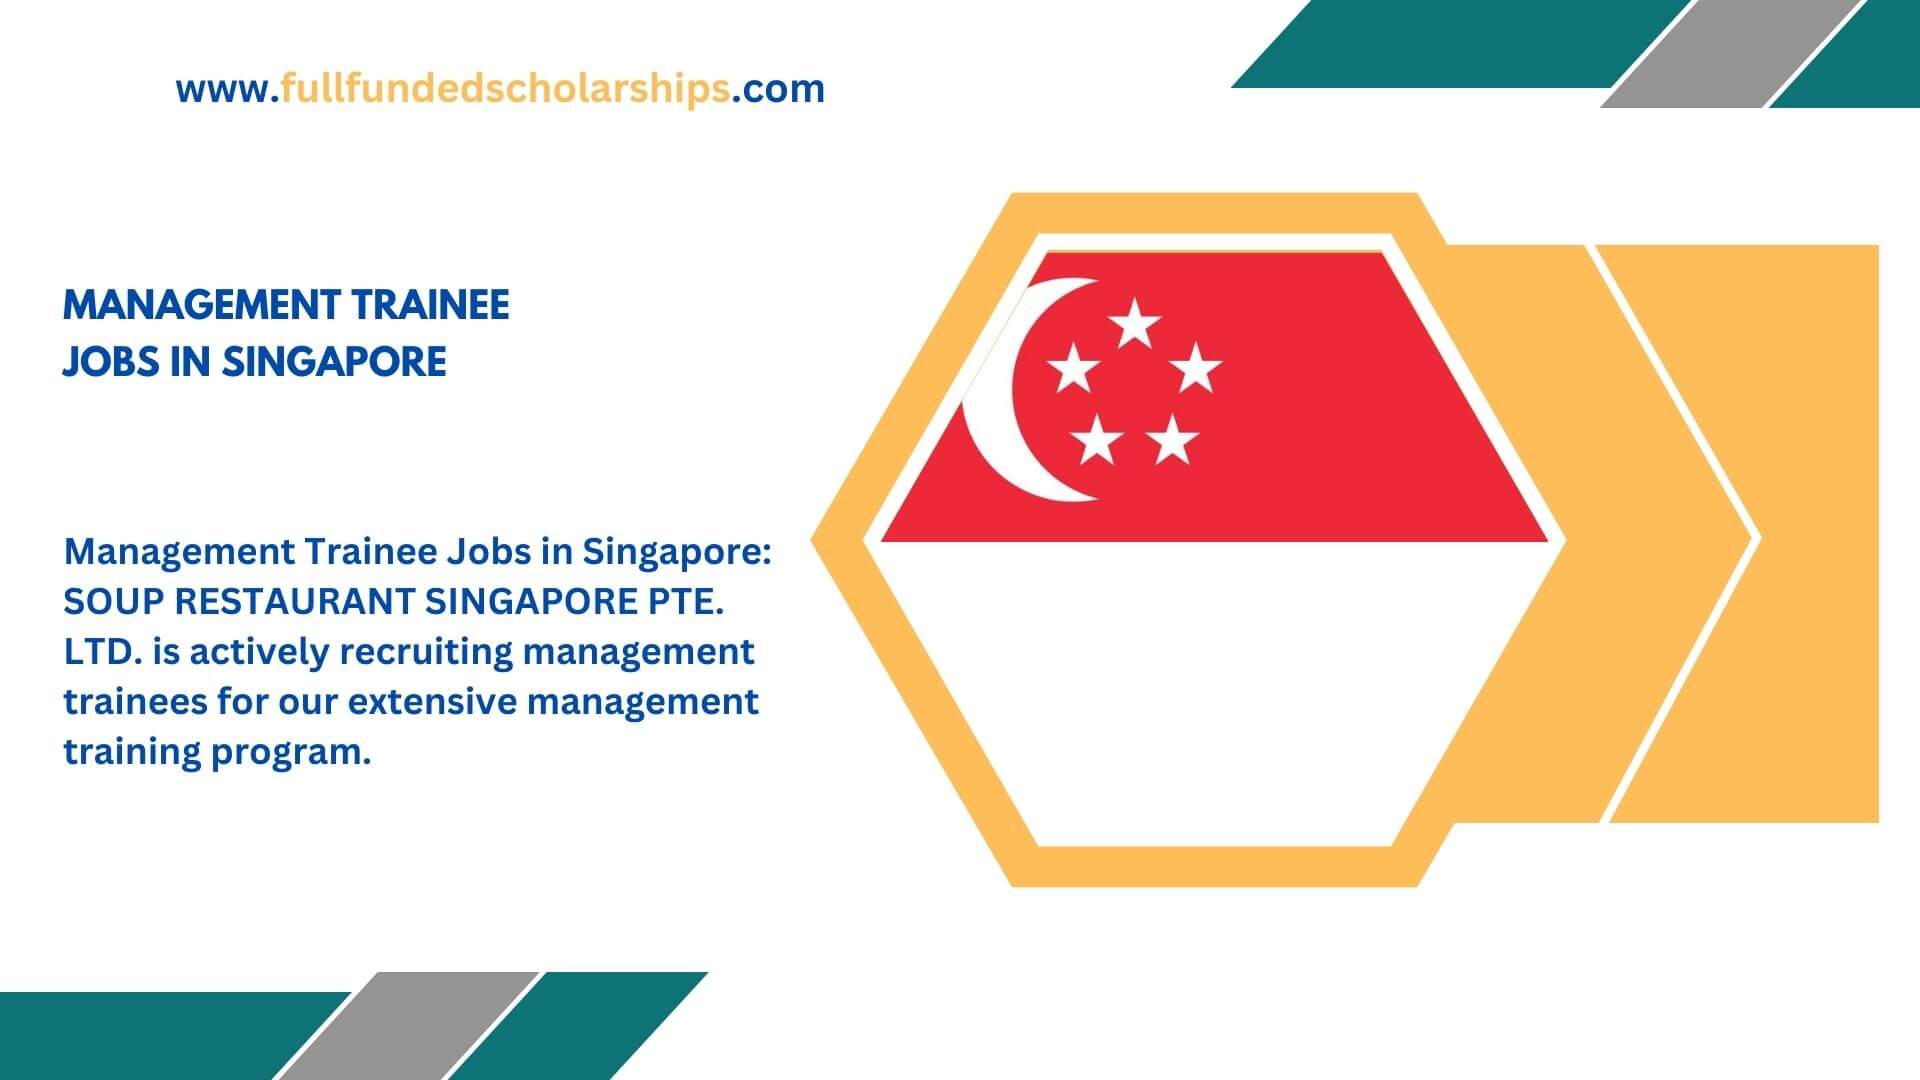 Management Trainee Jobs in Singapore